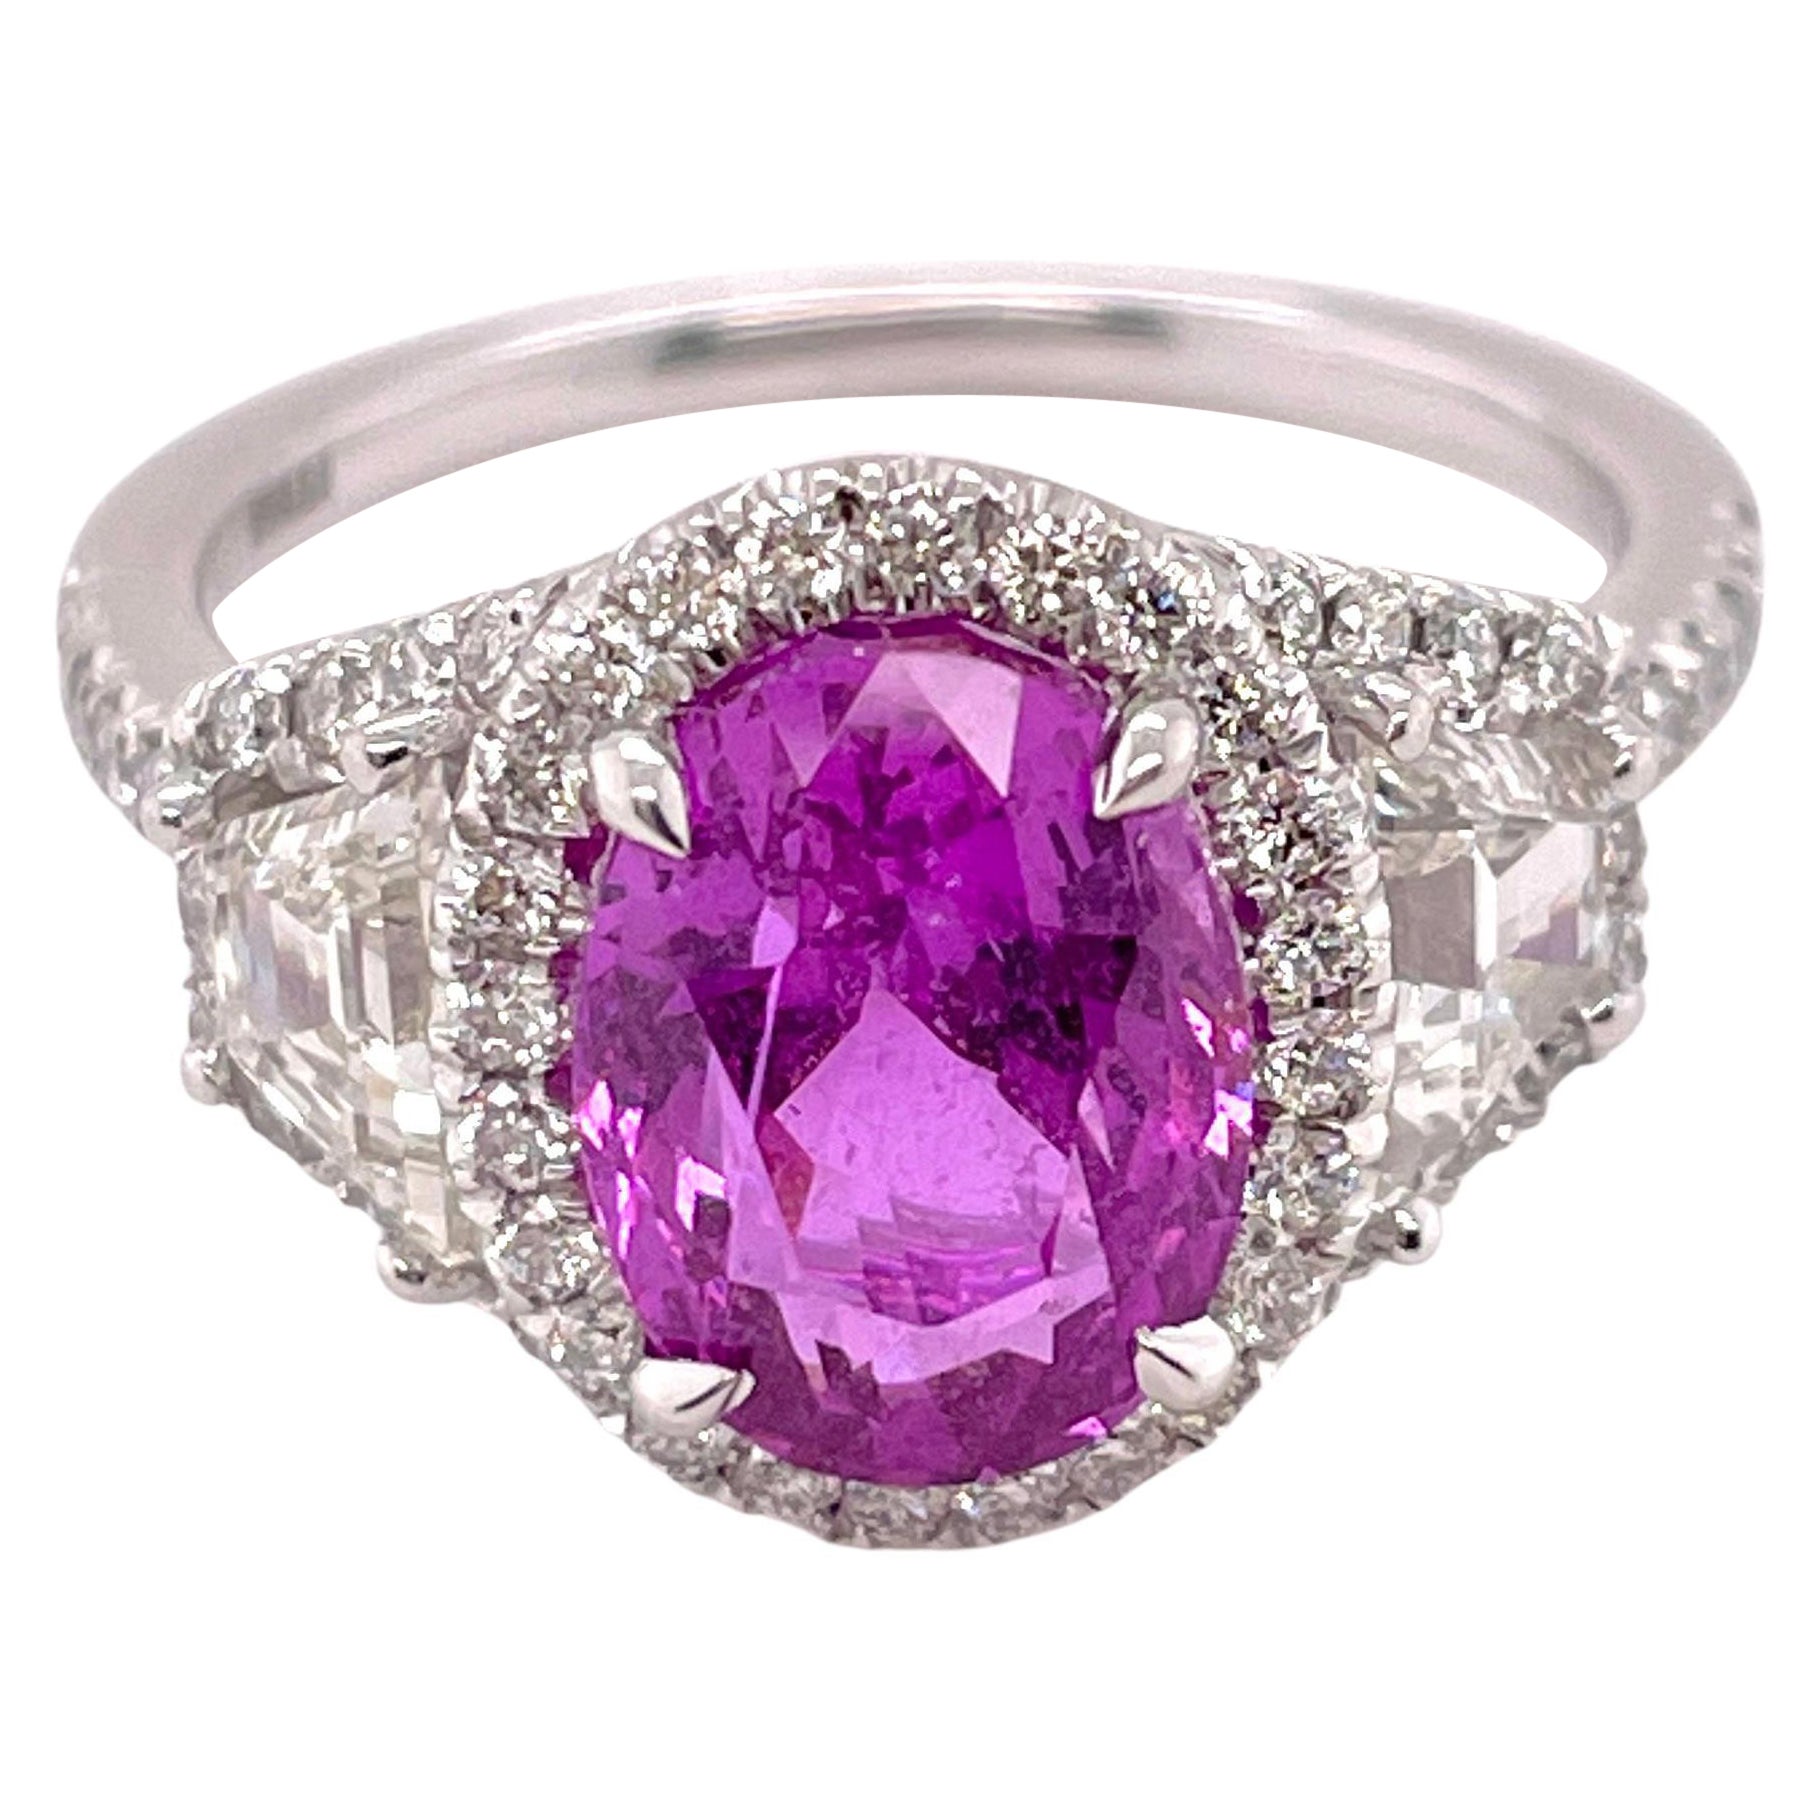 Unheated GIA Certified 3.51ct Oval Pink Sapphire & Diamonds Ring For Sale